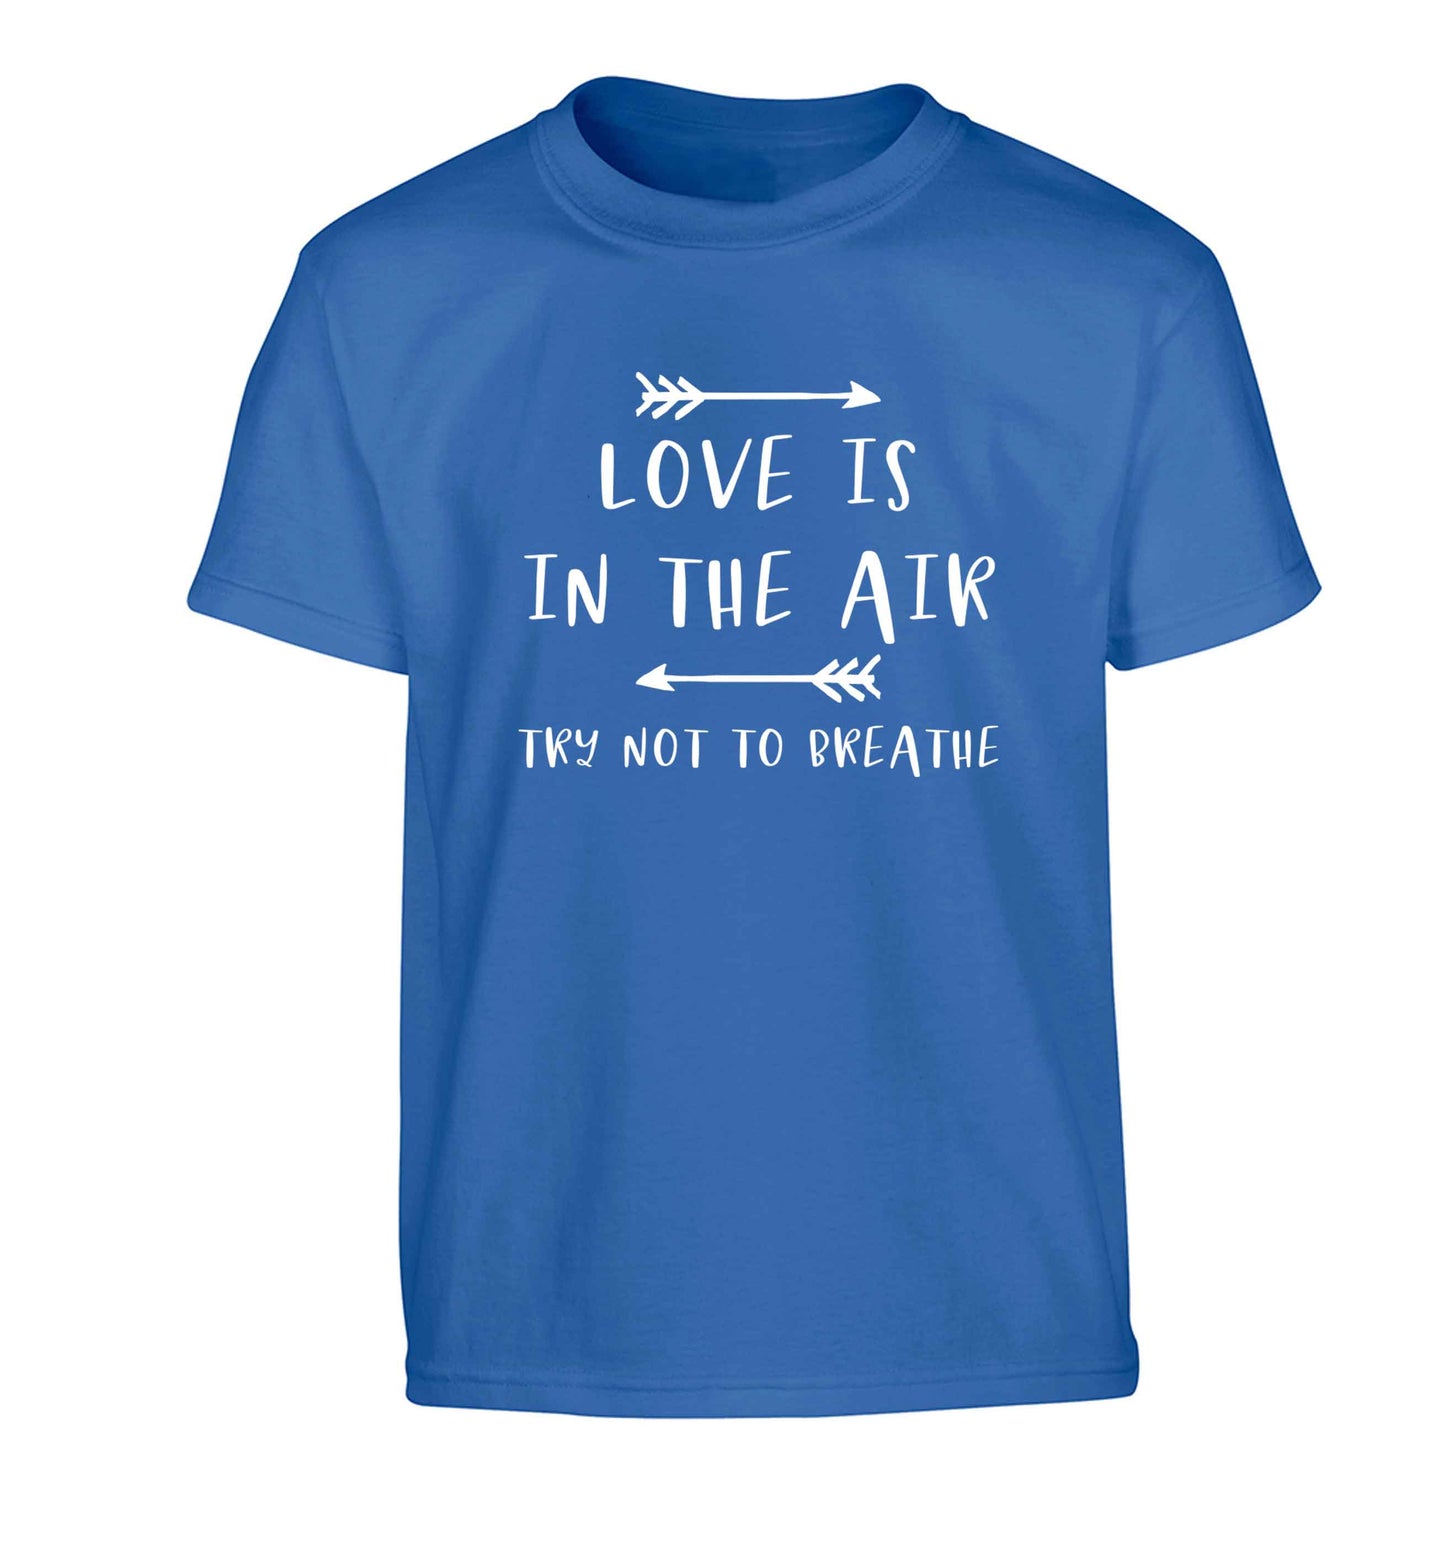 Love is in the air try not to breathe Children's blue Tshirt 12-13 Years